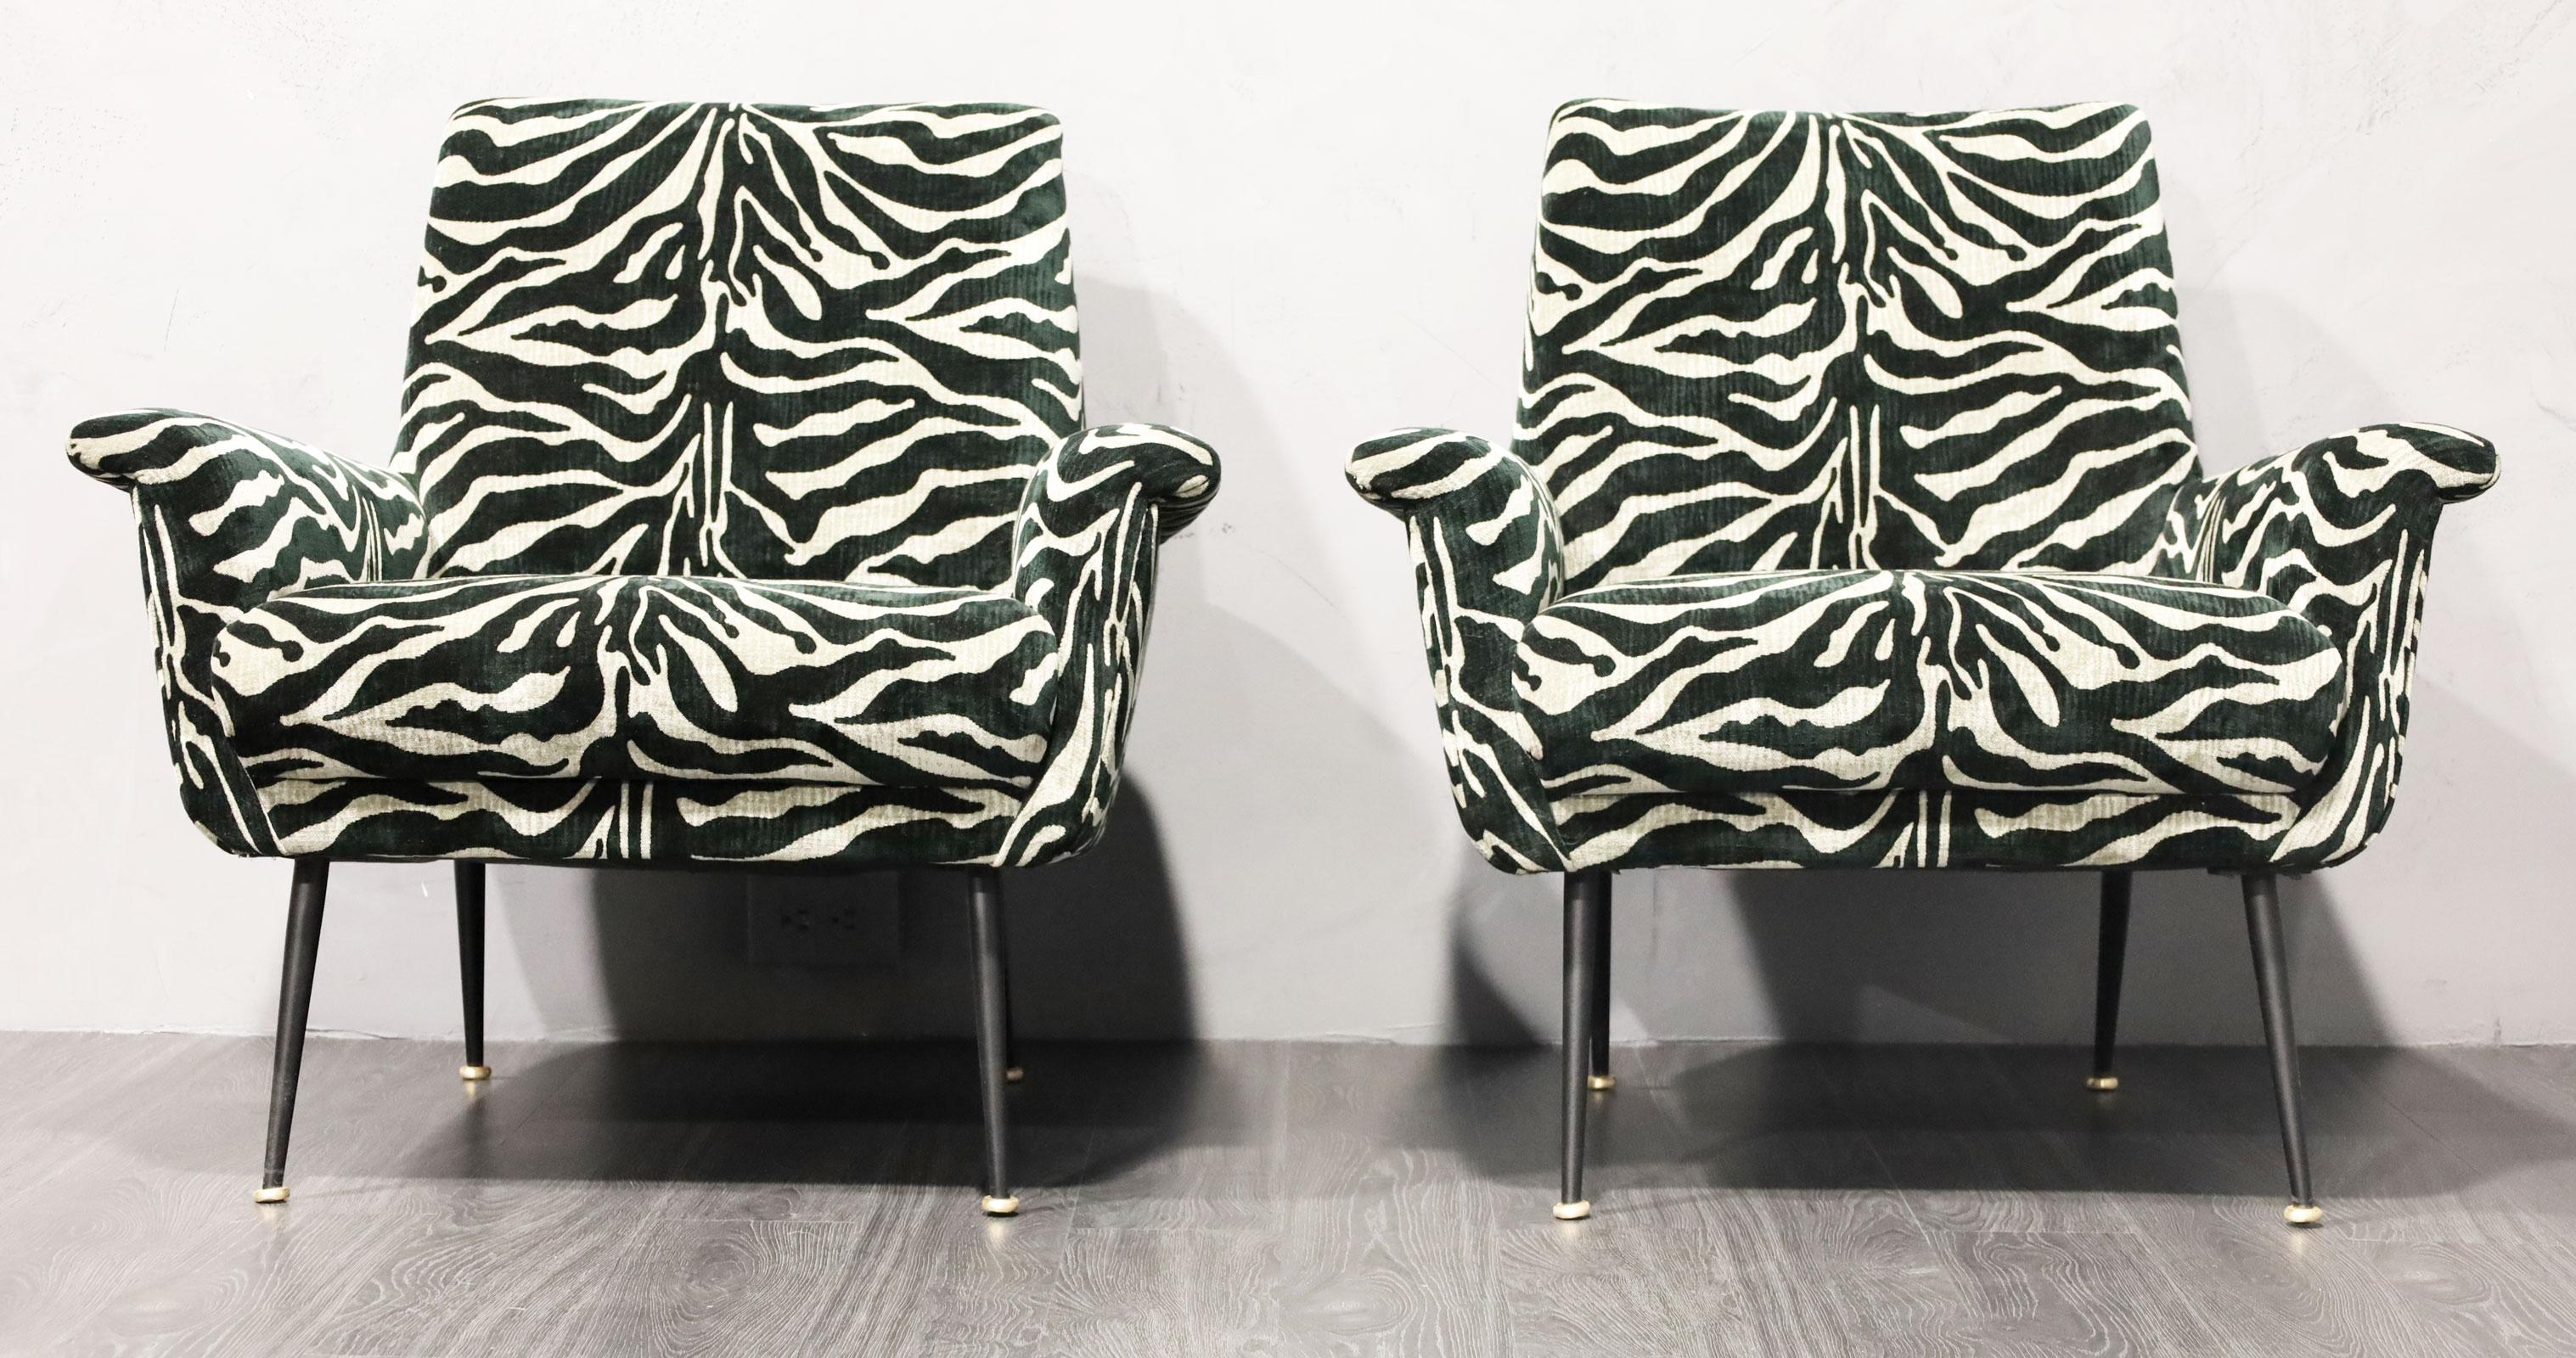 A black/gray animal print velvet/chenille upholstery with refinished metal legs with brass caps.  Beautiful pattern and high drama for any room.  Chairs are comfortable as well. 